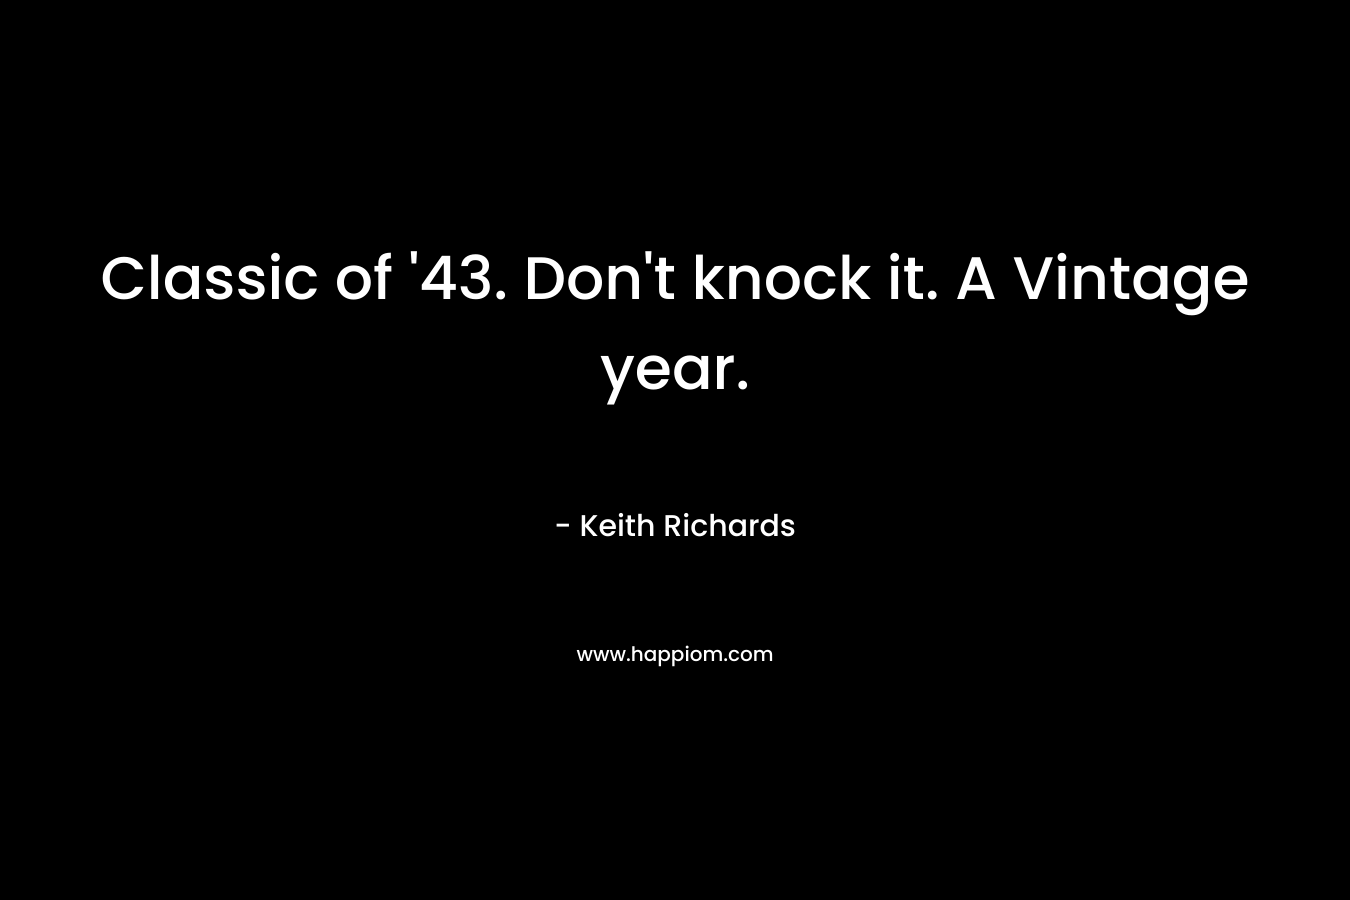 Classic of '43. Don't knock it. A Vintage year.